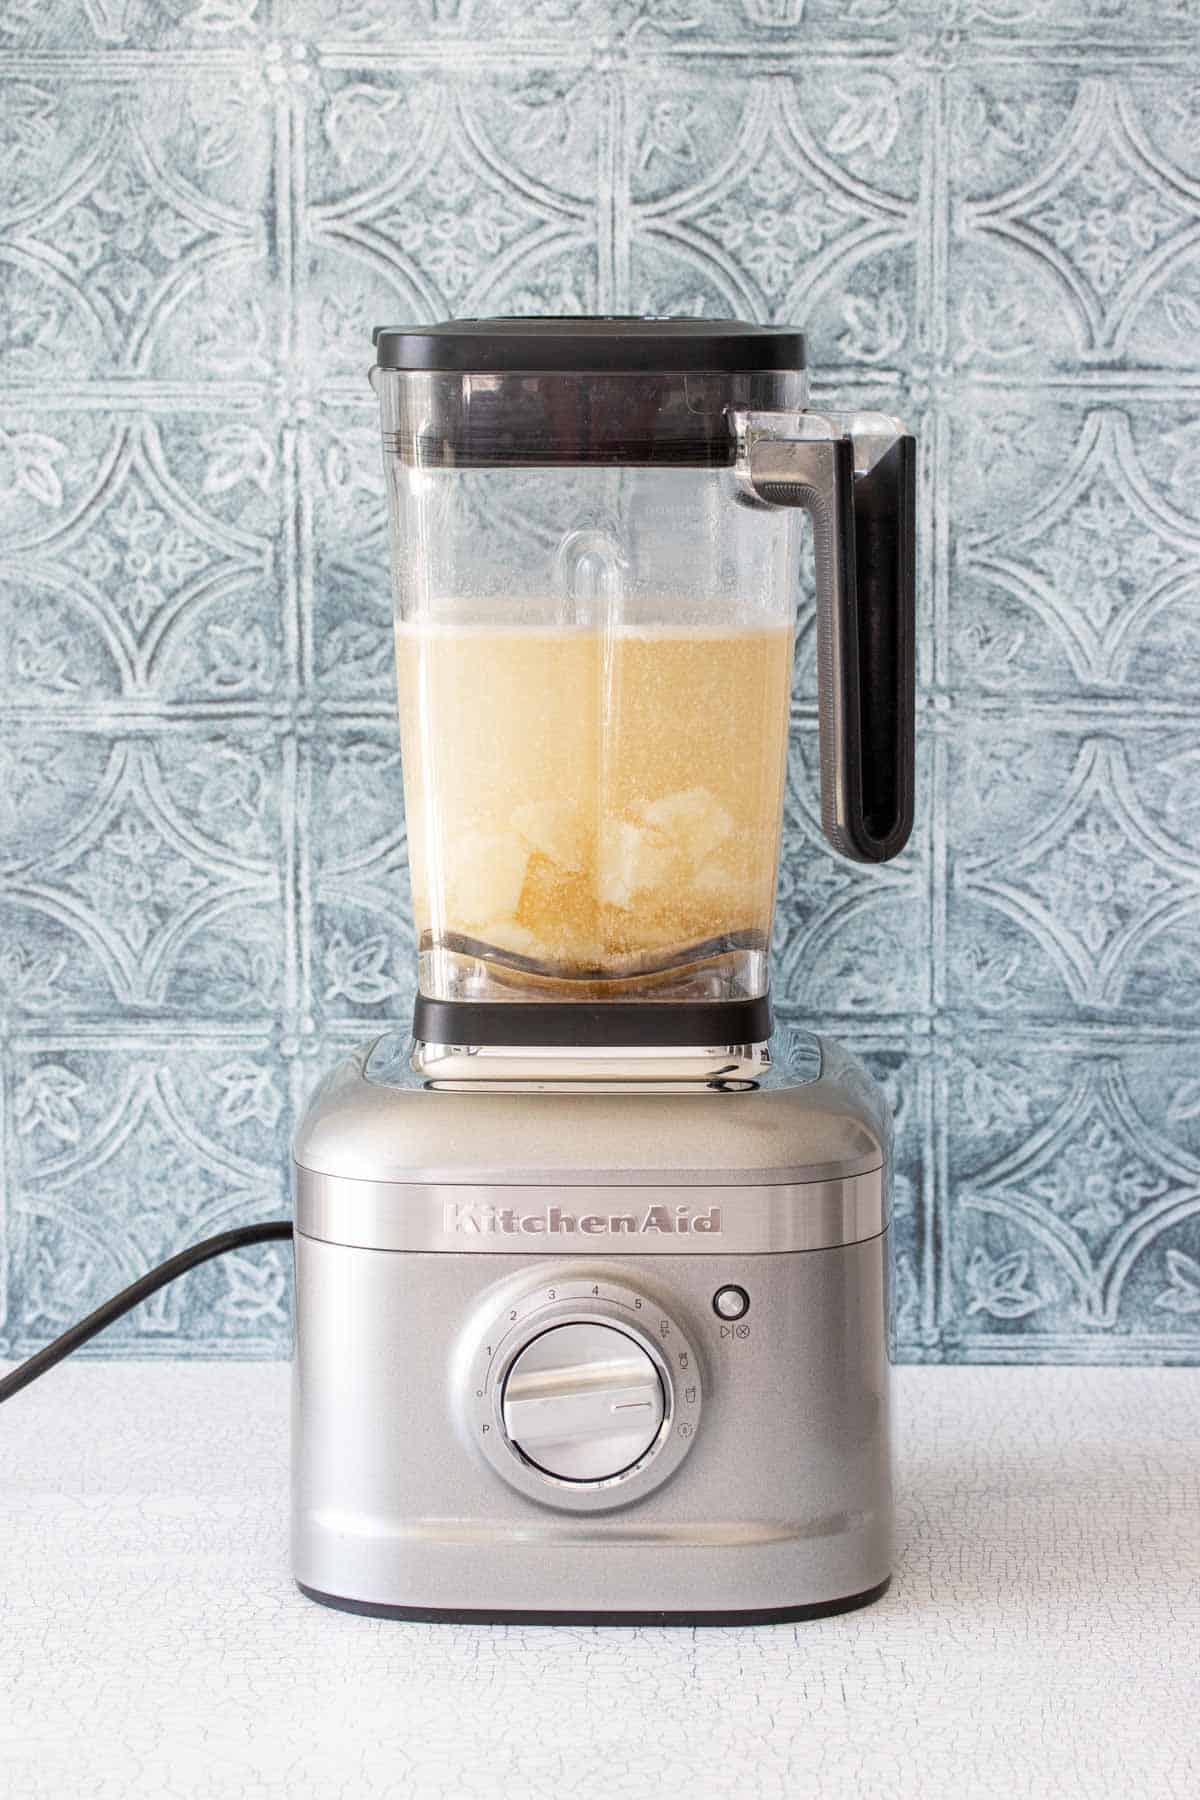 A white counter with a blue tile backsplash and a silver blender on it filled with potato pieces and a murky liquid